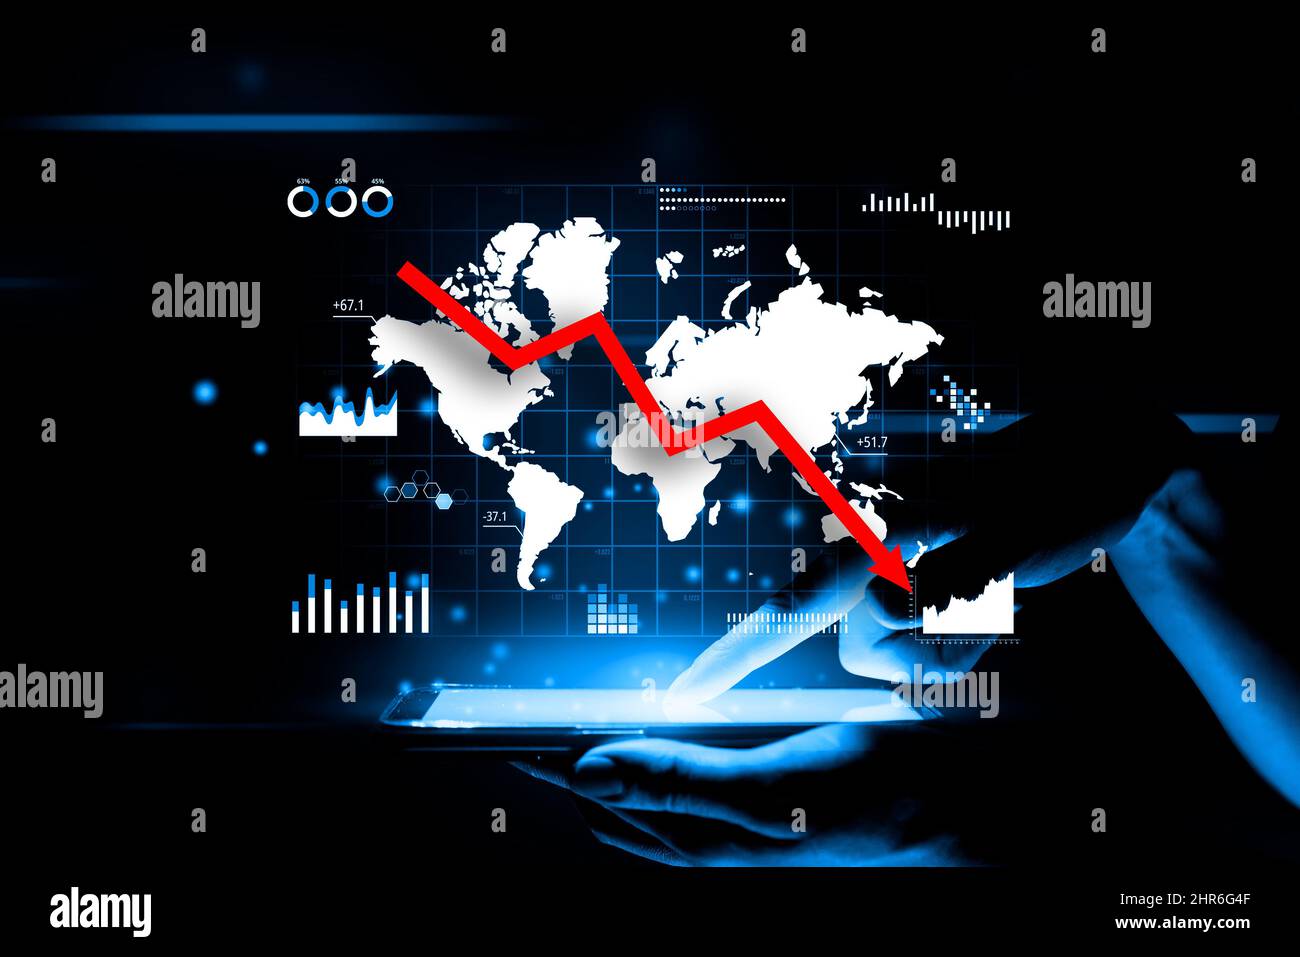 Concept of world crisis. A falling down arrow against the background of a holographic image with a world map Stock Photo